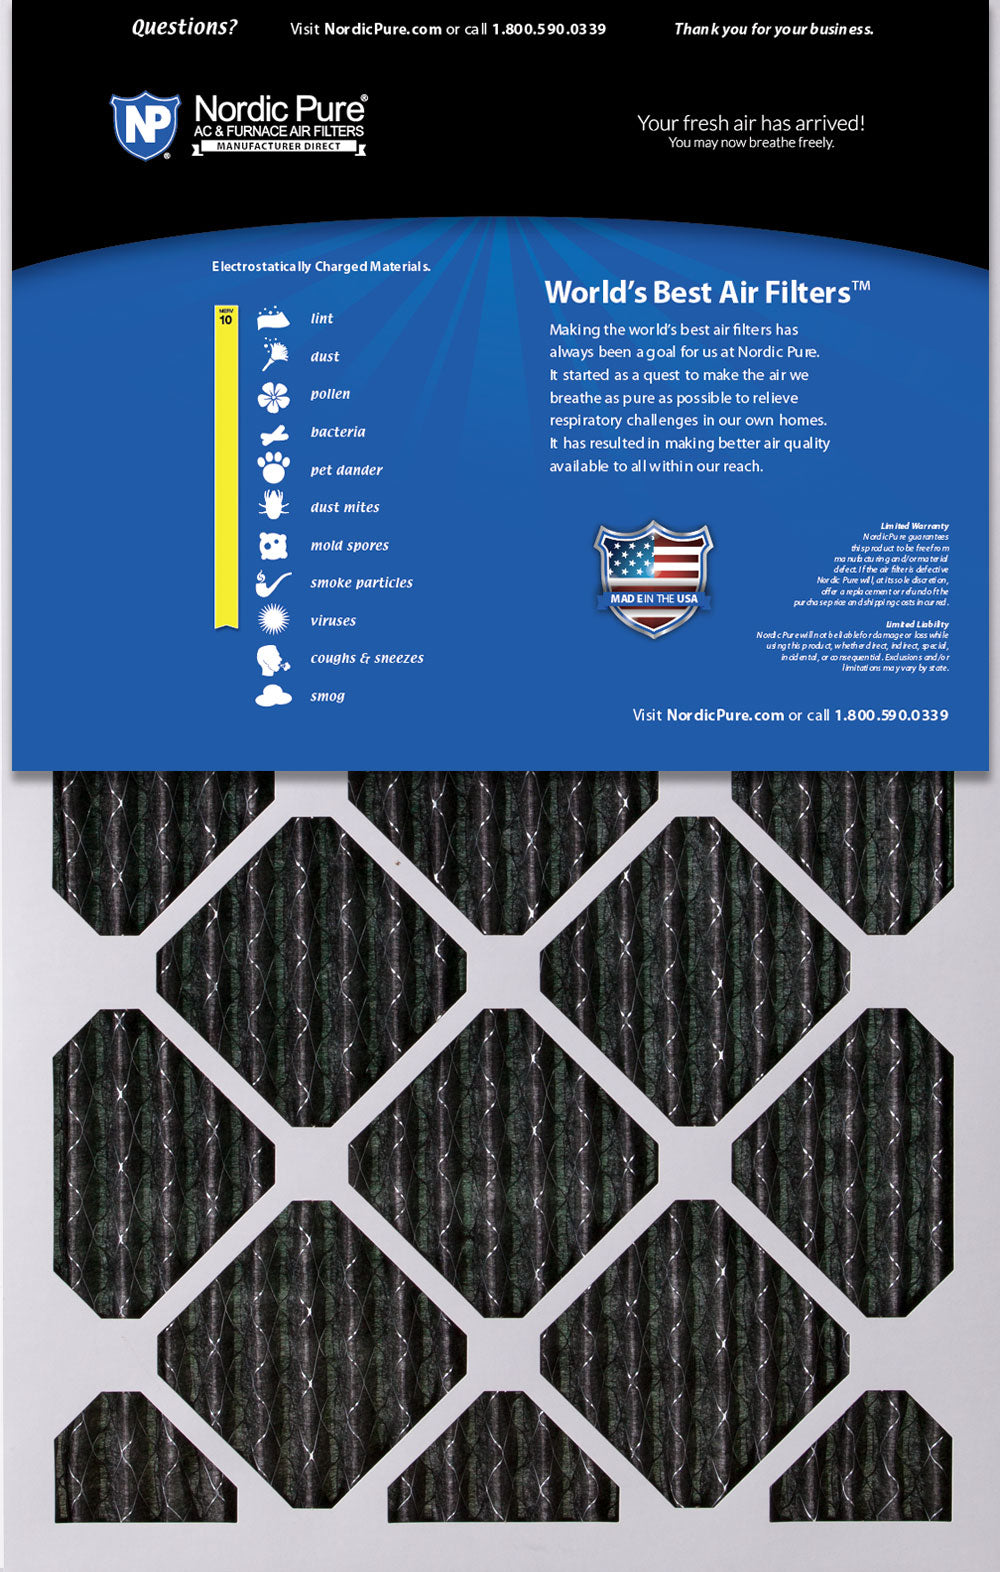 16x20x1 Furnace Air Filters MERV 10 Pleated Plus Carbon